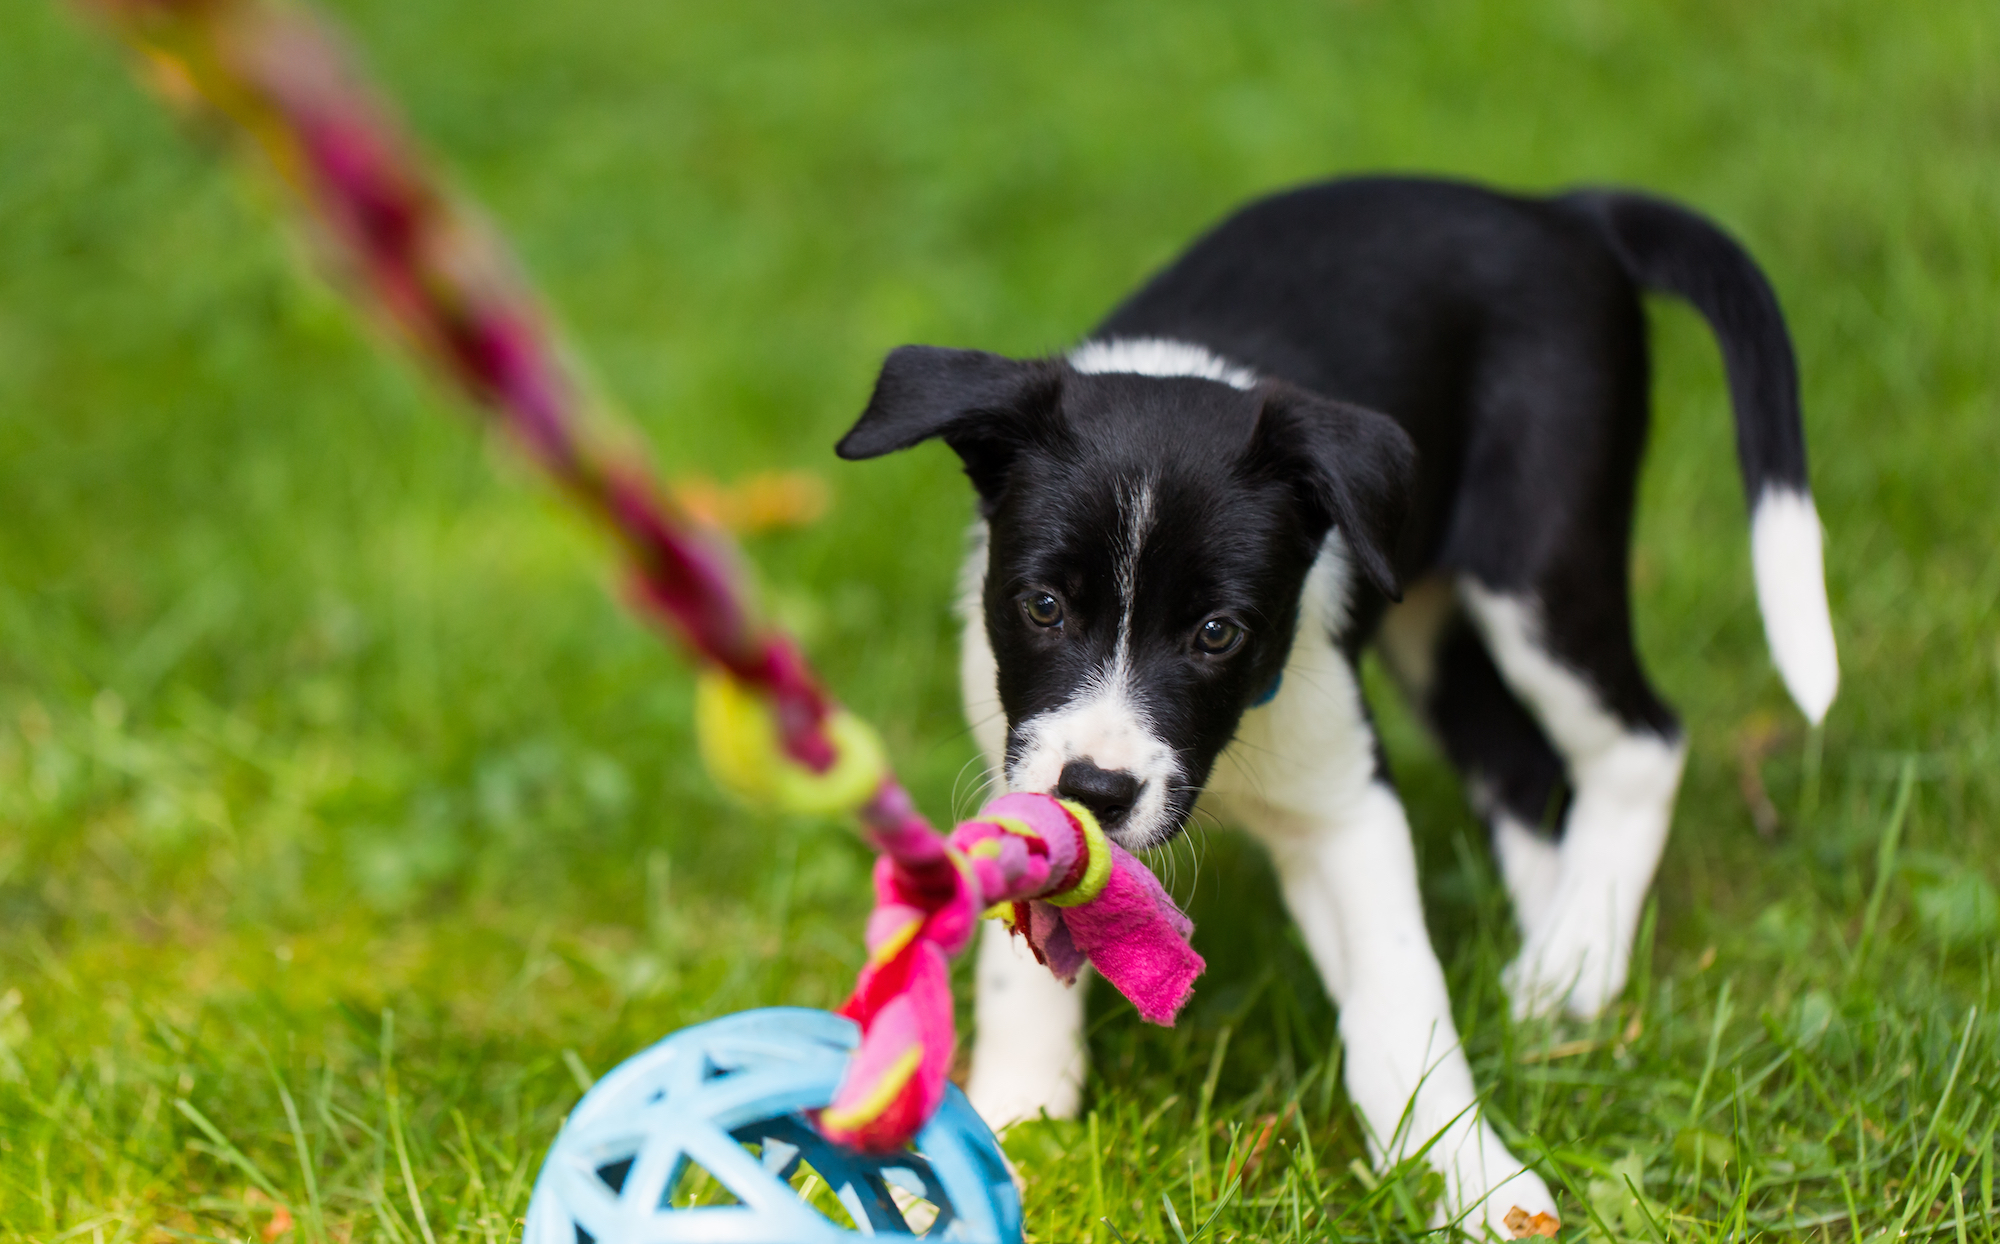 Puppy Development Stages: Your Puppy During the First 6 Months